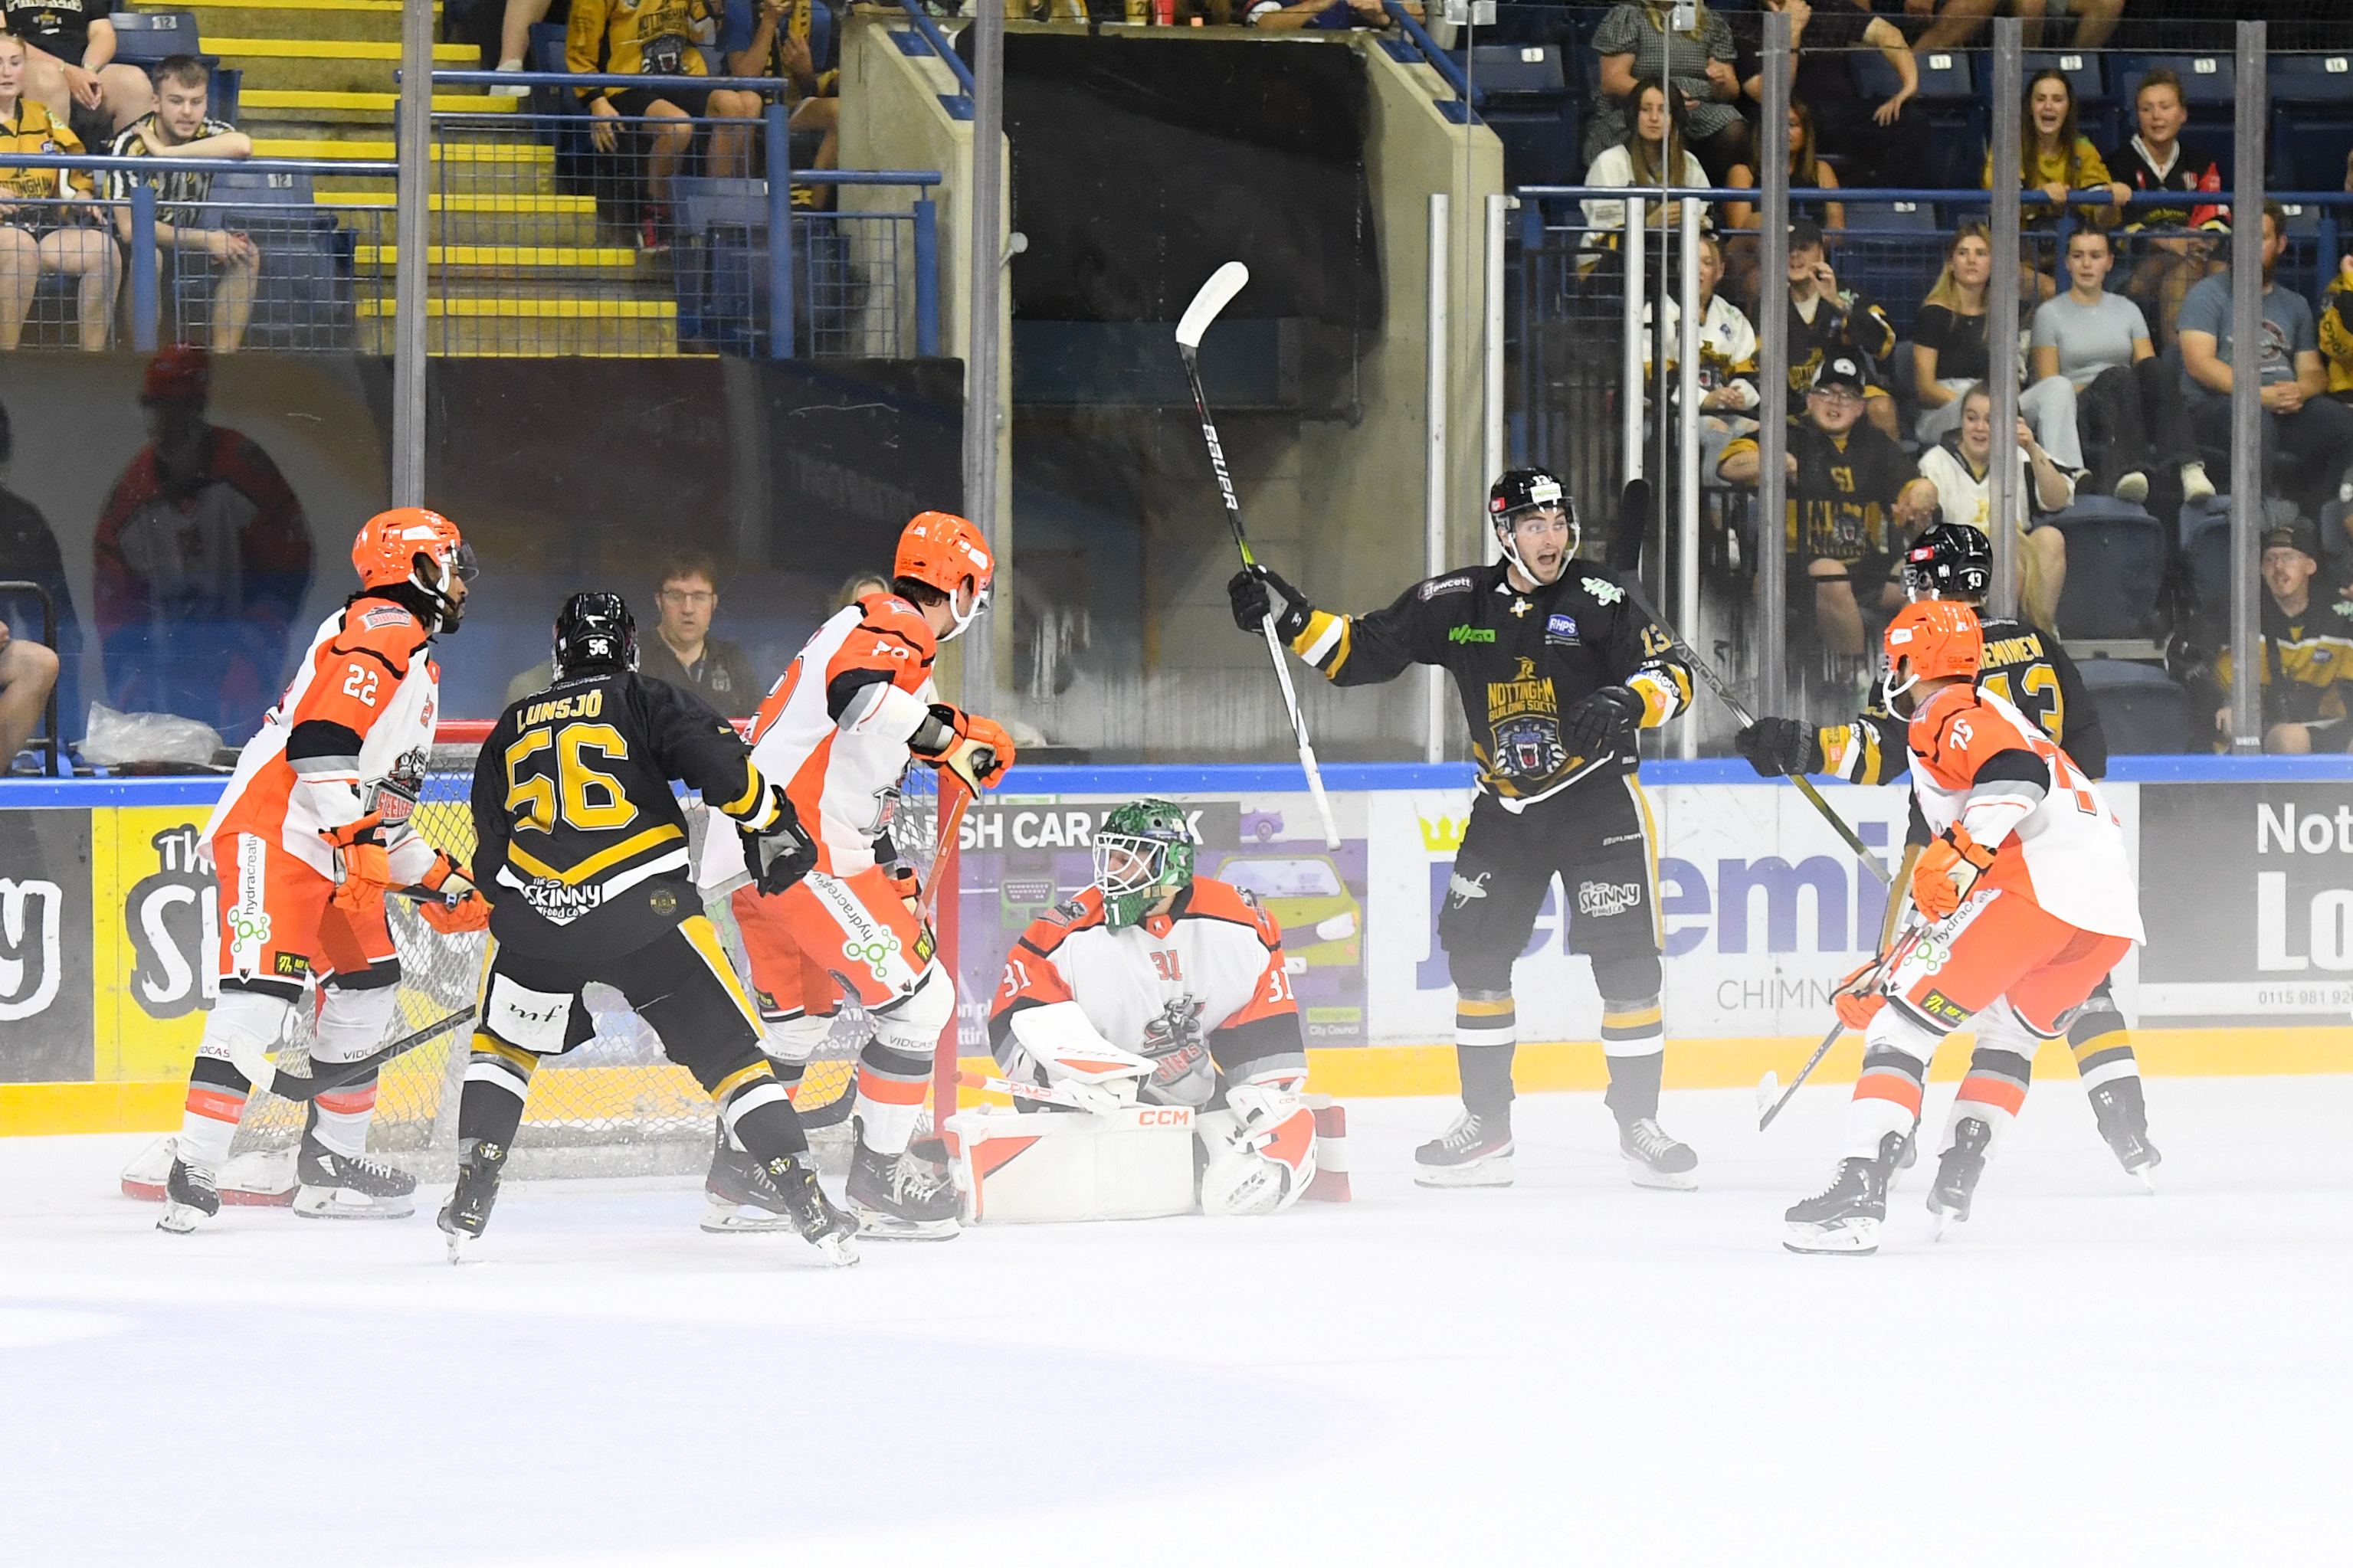 PREVIEW: PANTHERS HOST STEELERS IN CHALLENGE CUP Top Image